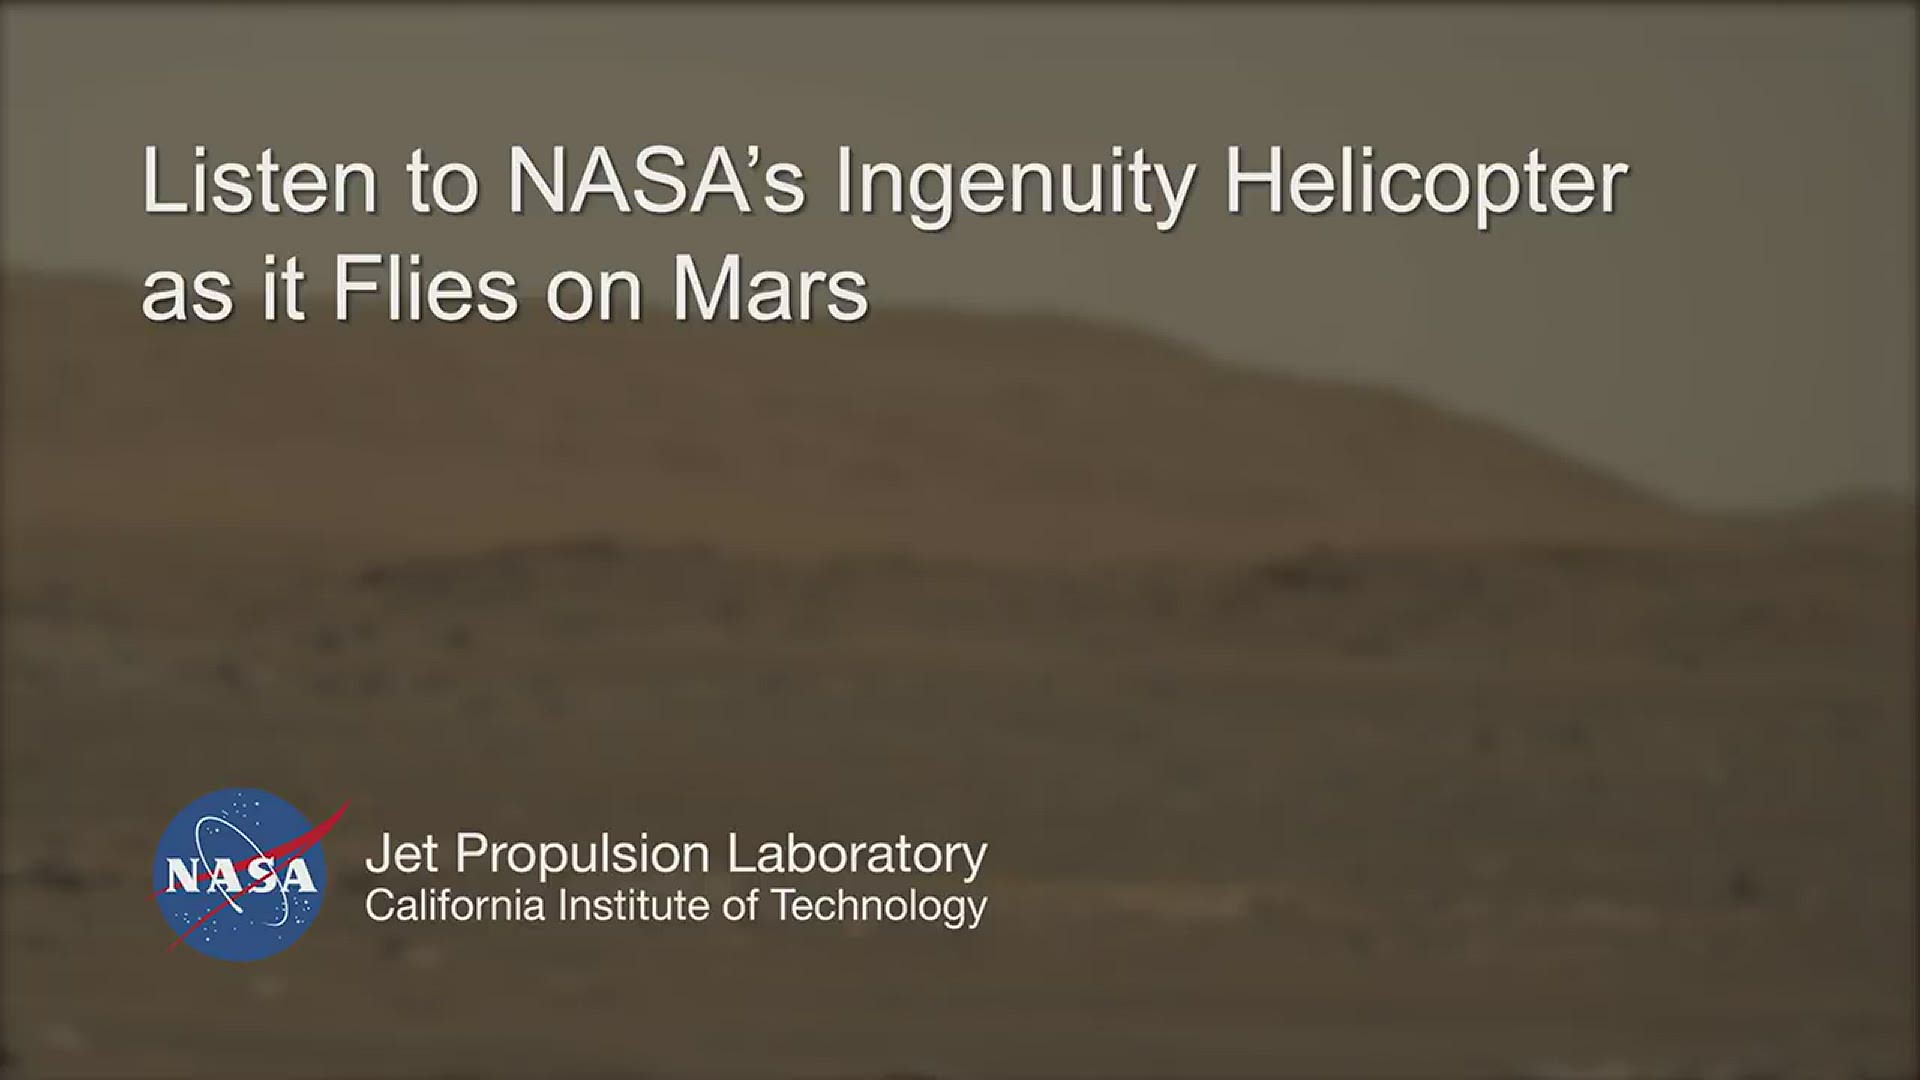 The Mars Perseverance rover detected the low hum of the Ingenuity helicopter flying over the Red Planet.